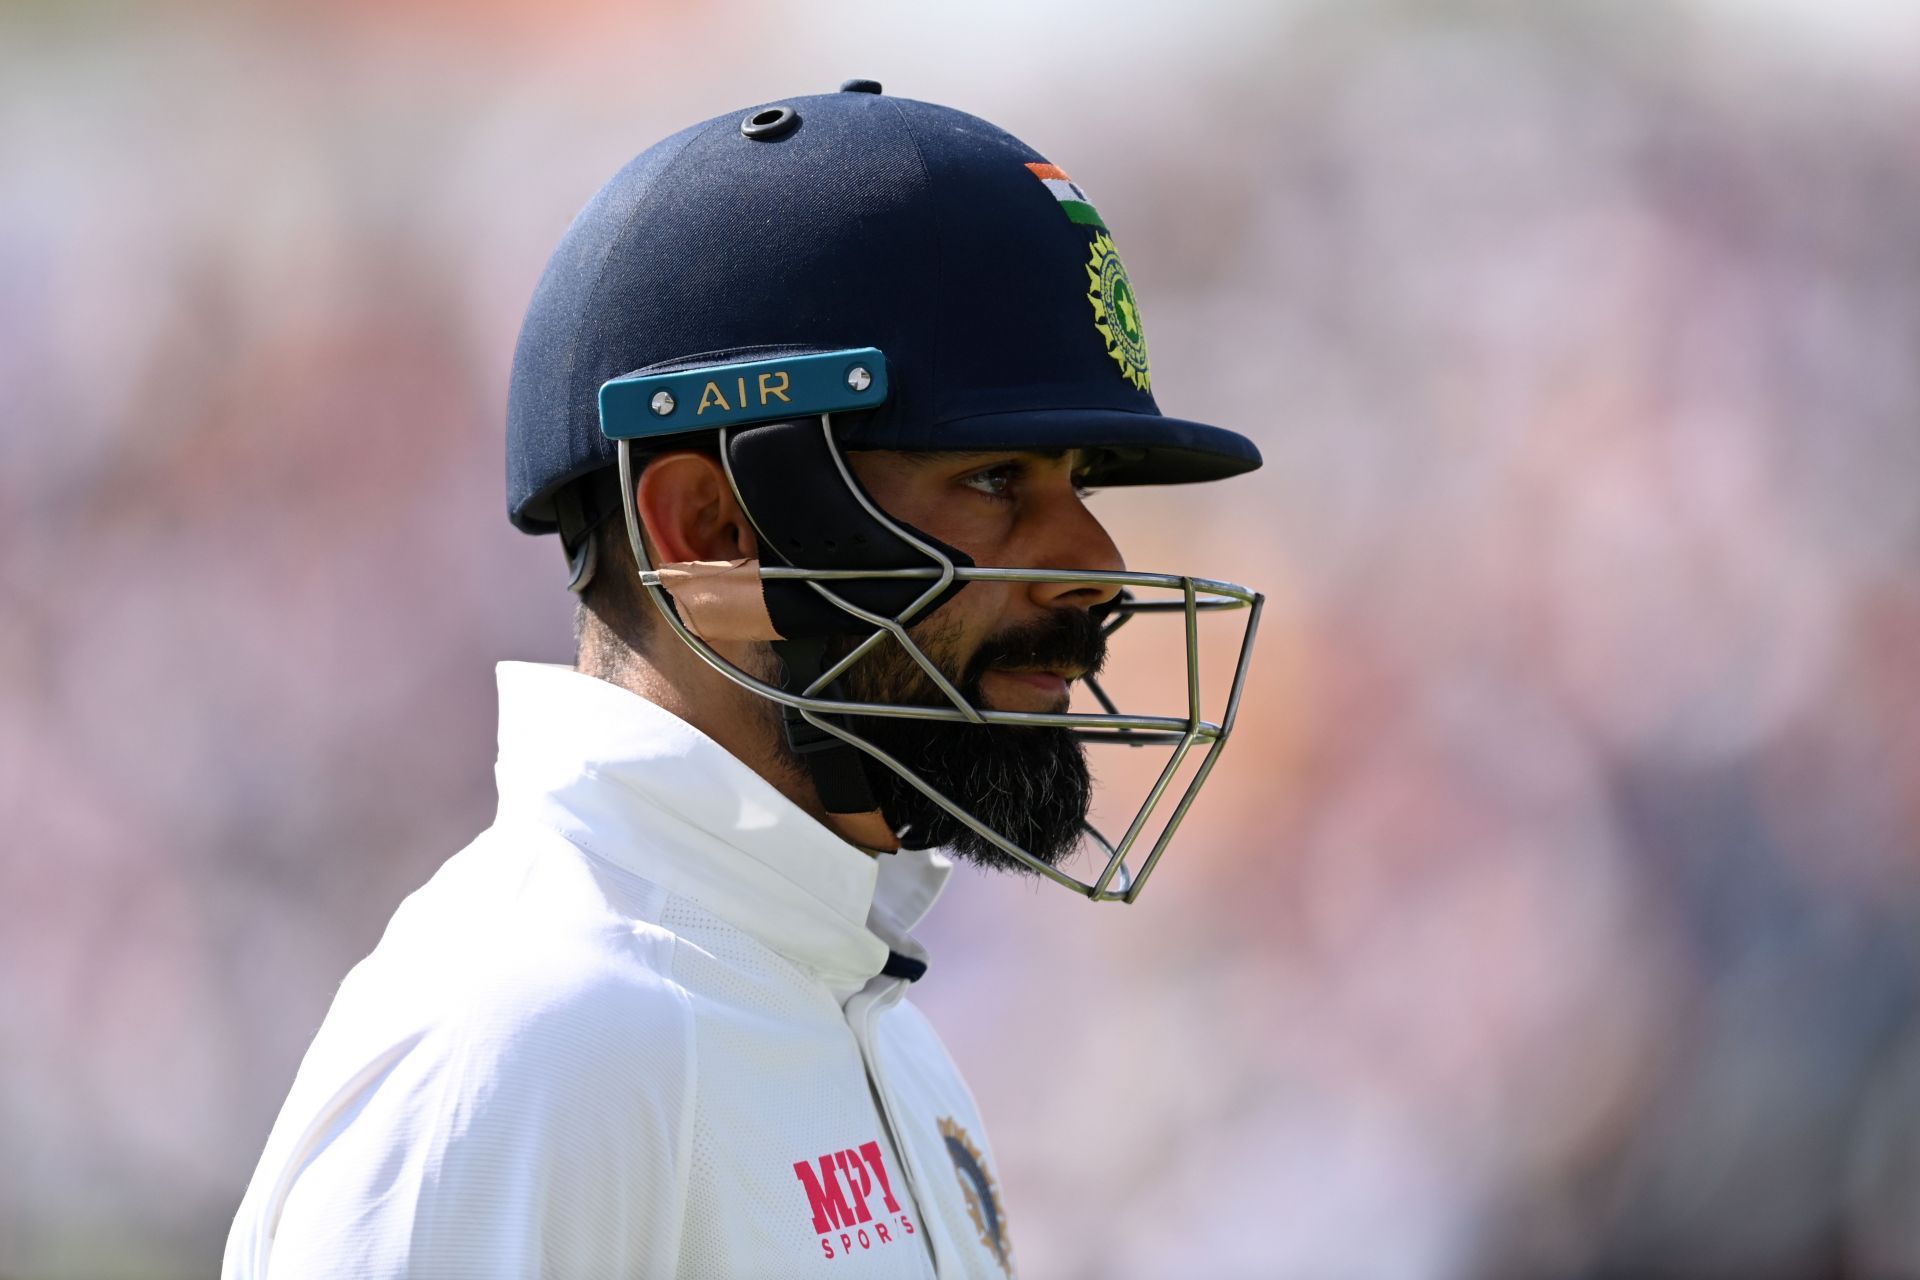 Virat Kohli has not scored a Test century for over two years